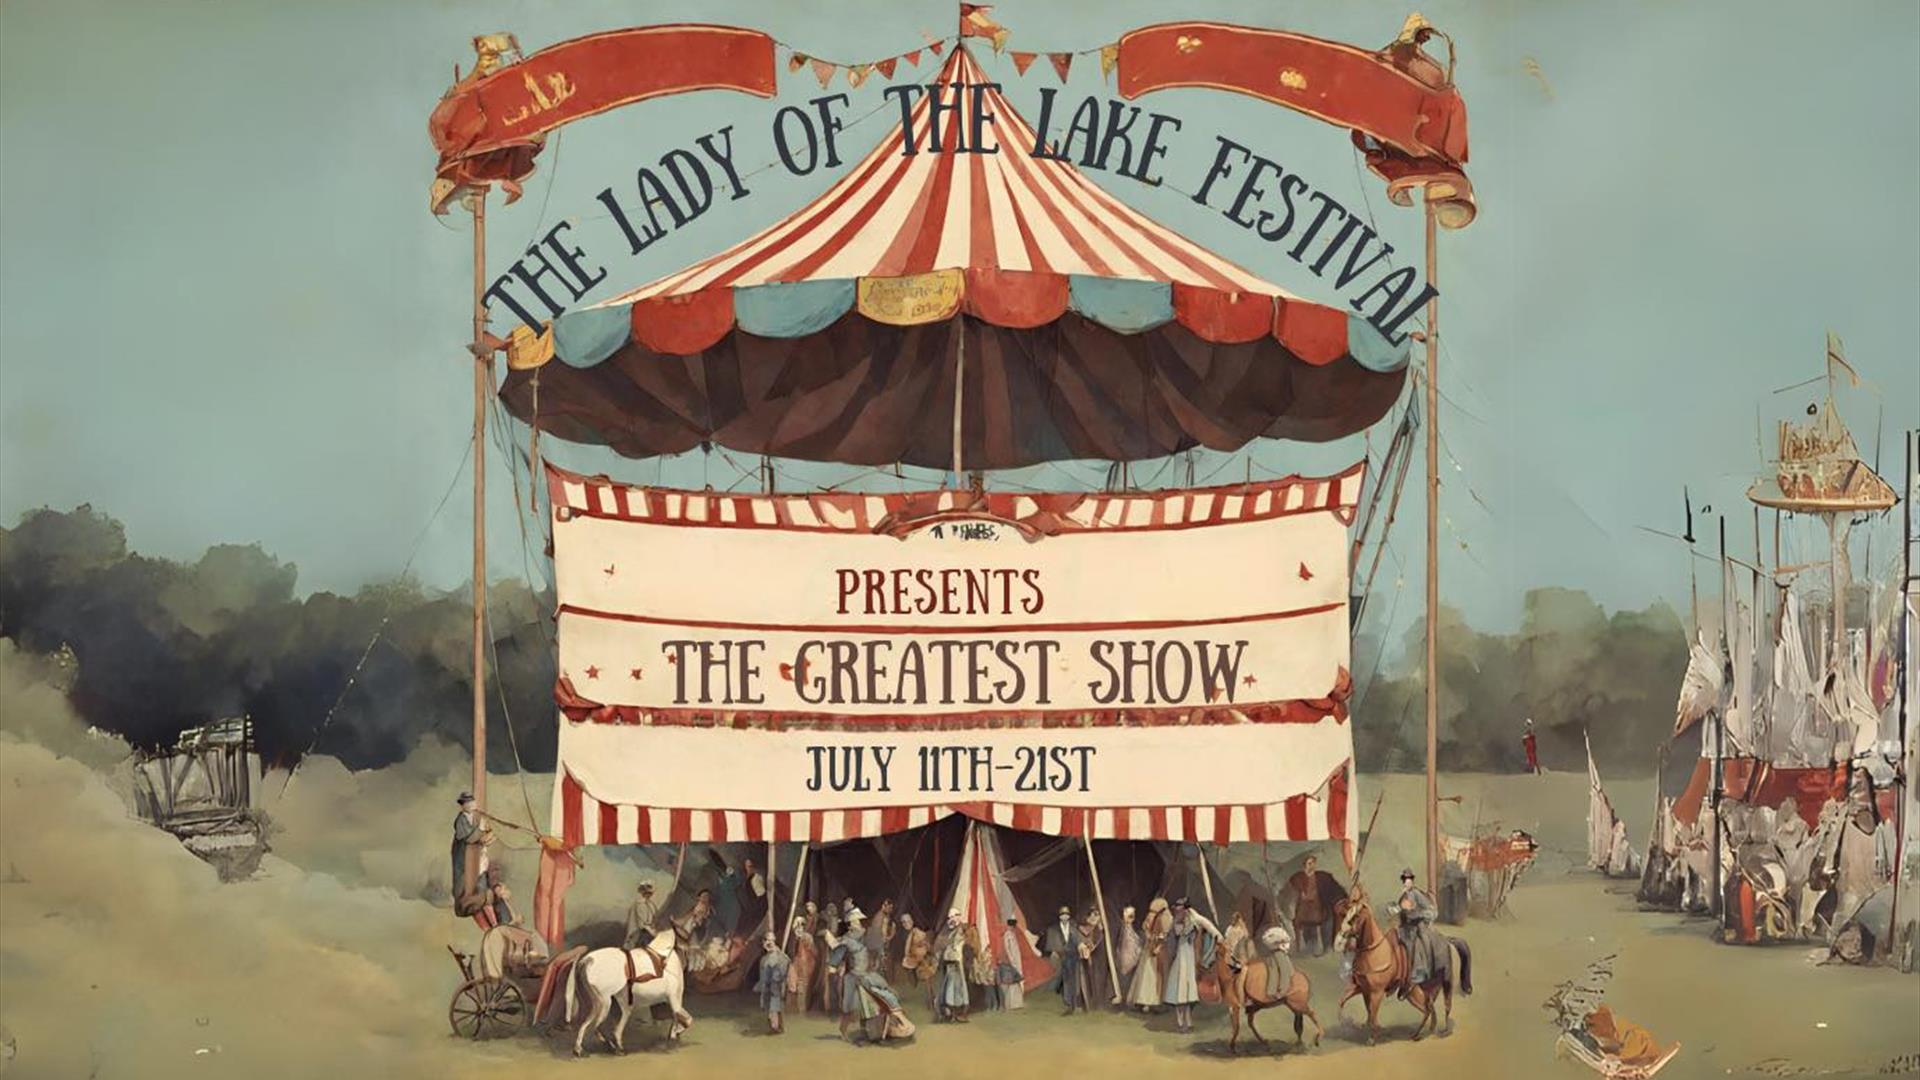 Lady of the Lake Festival, 11-21 July